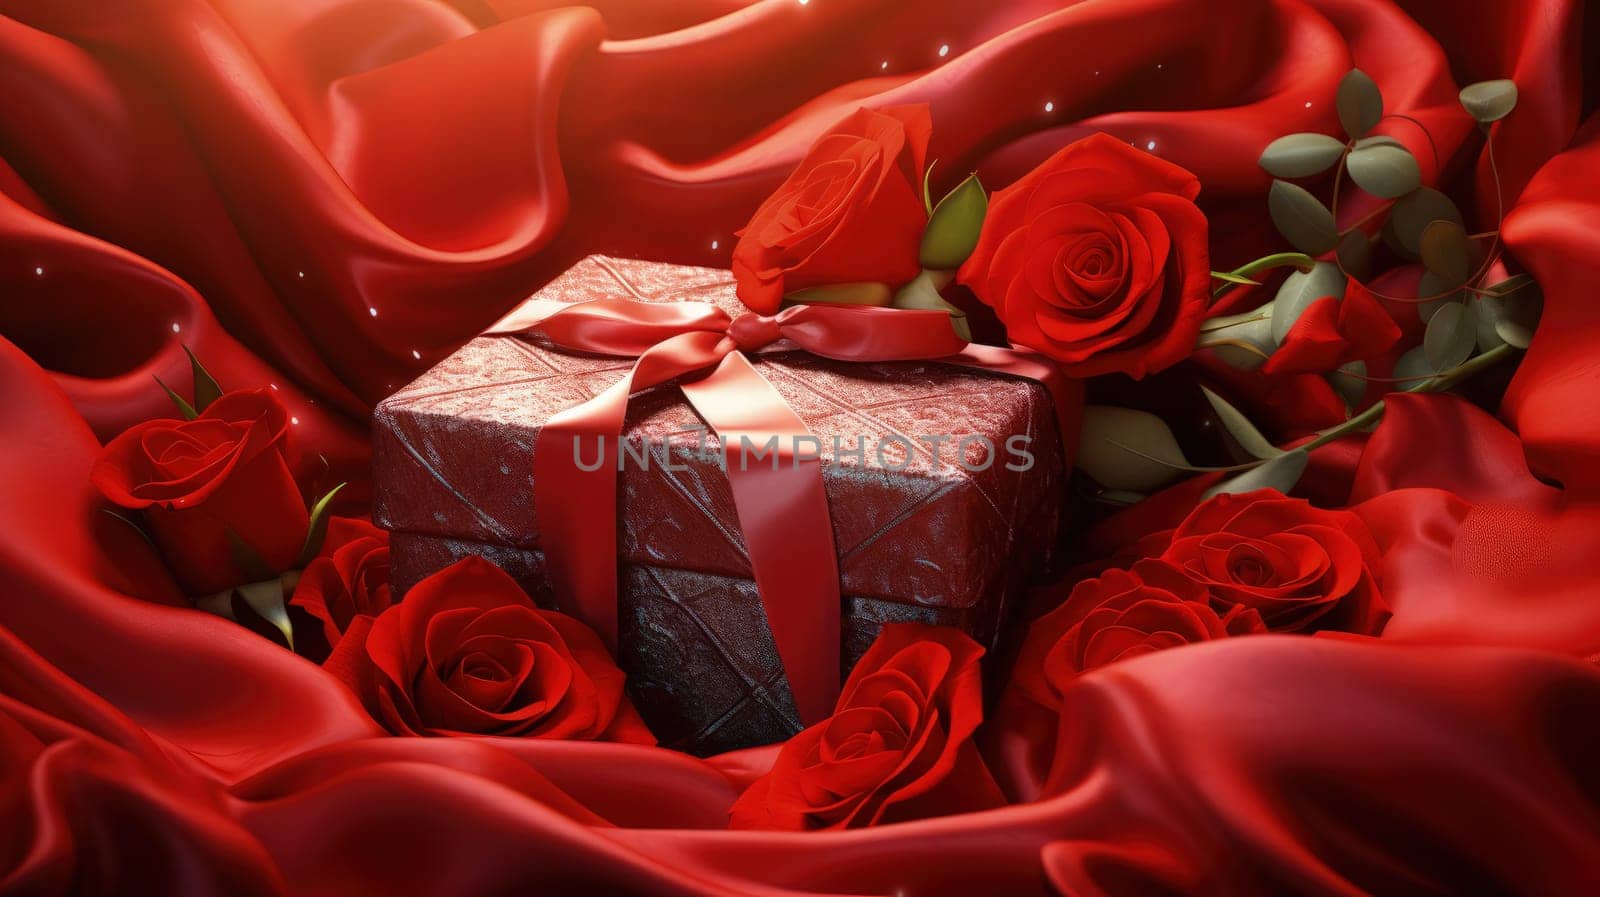 A luxurious gift box wrapped in vibrant red silk, nestled in a bed of velvety red roses, soft petals scattering around, creating an enchanting Valentine's Day ambiance